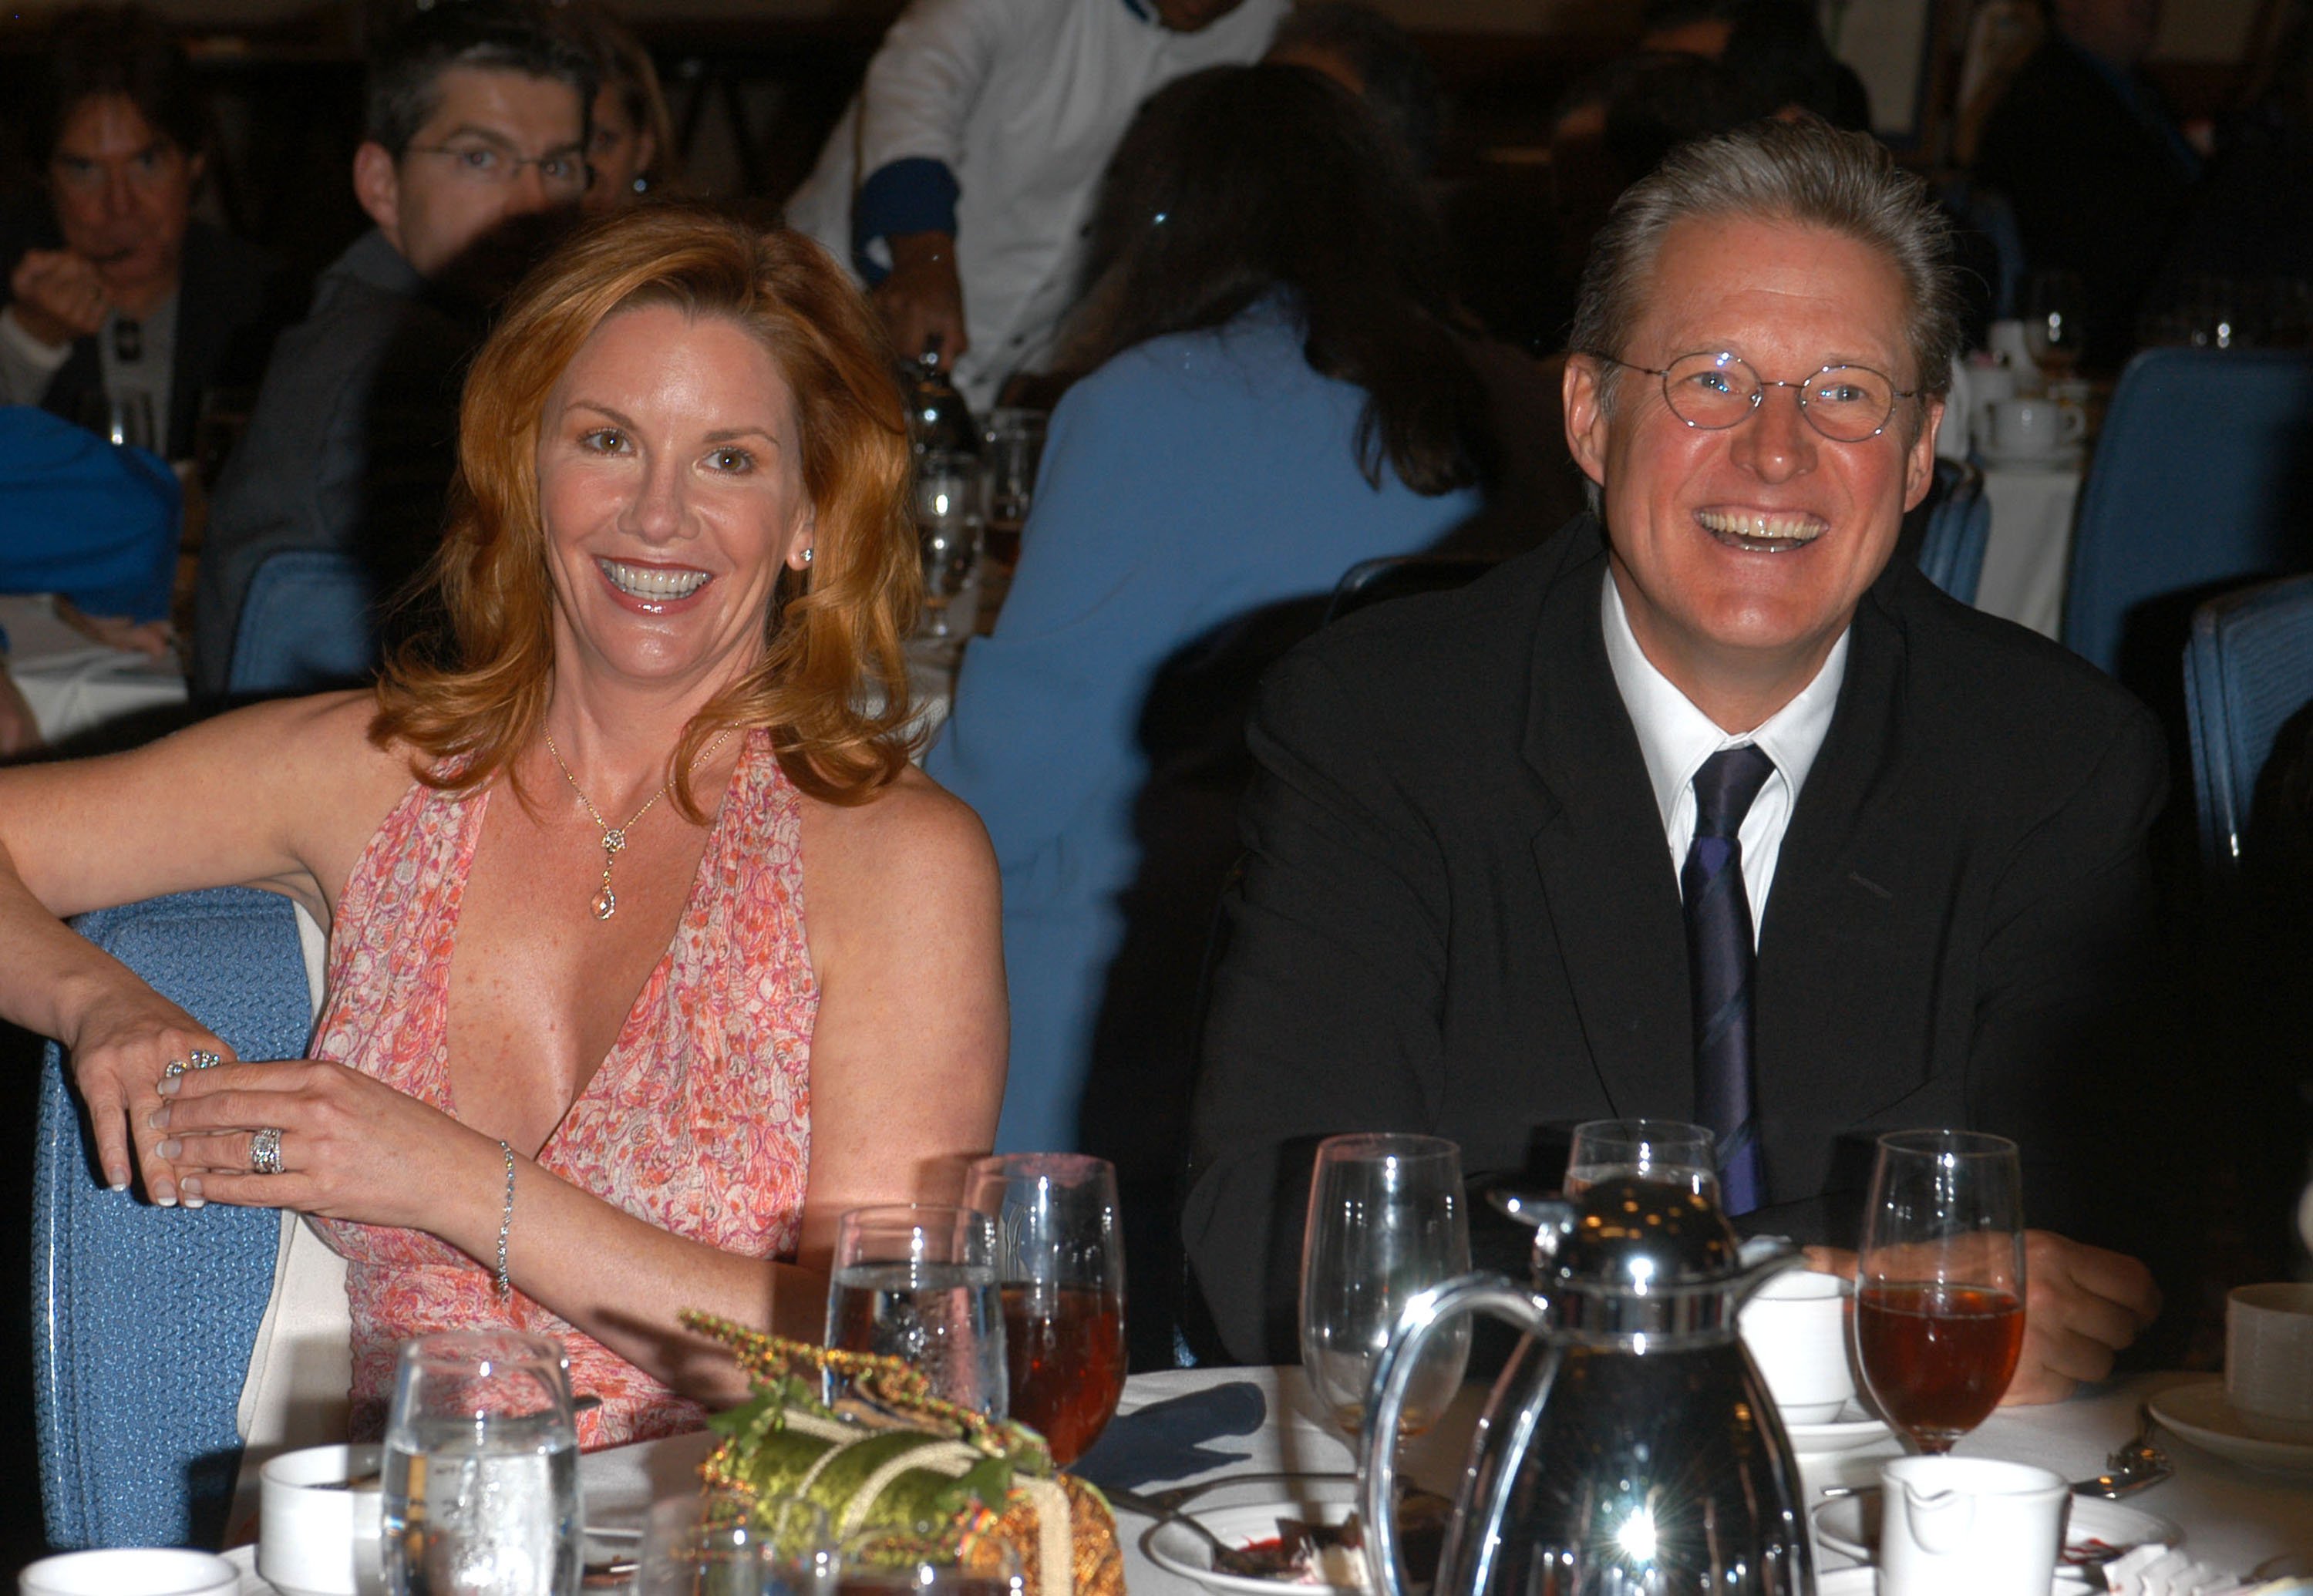 Melissa Gilbert in a pink dress, Bruce Boxleitner in a black suit.